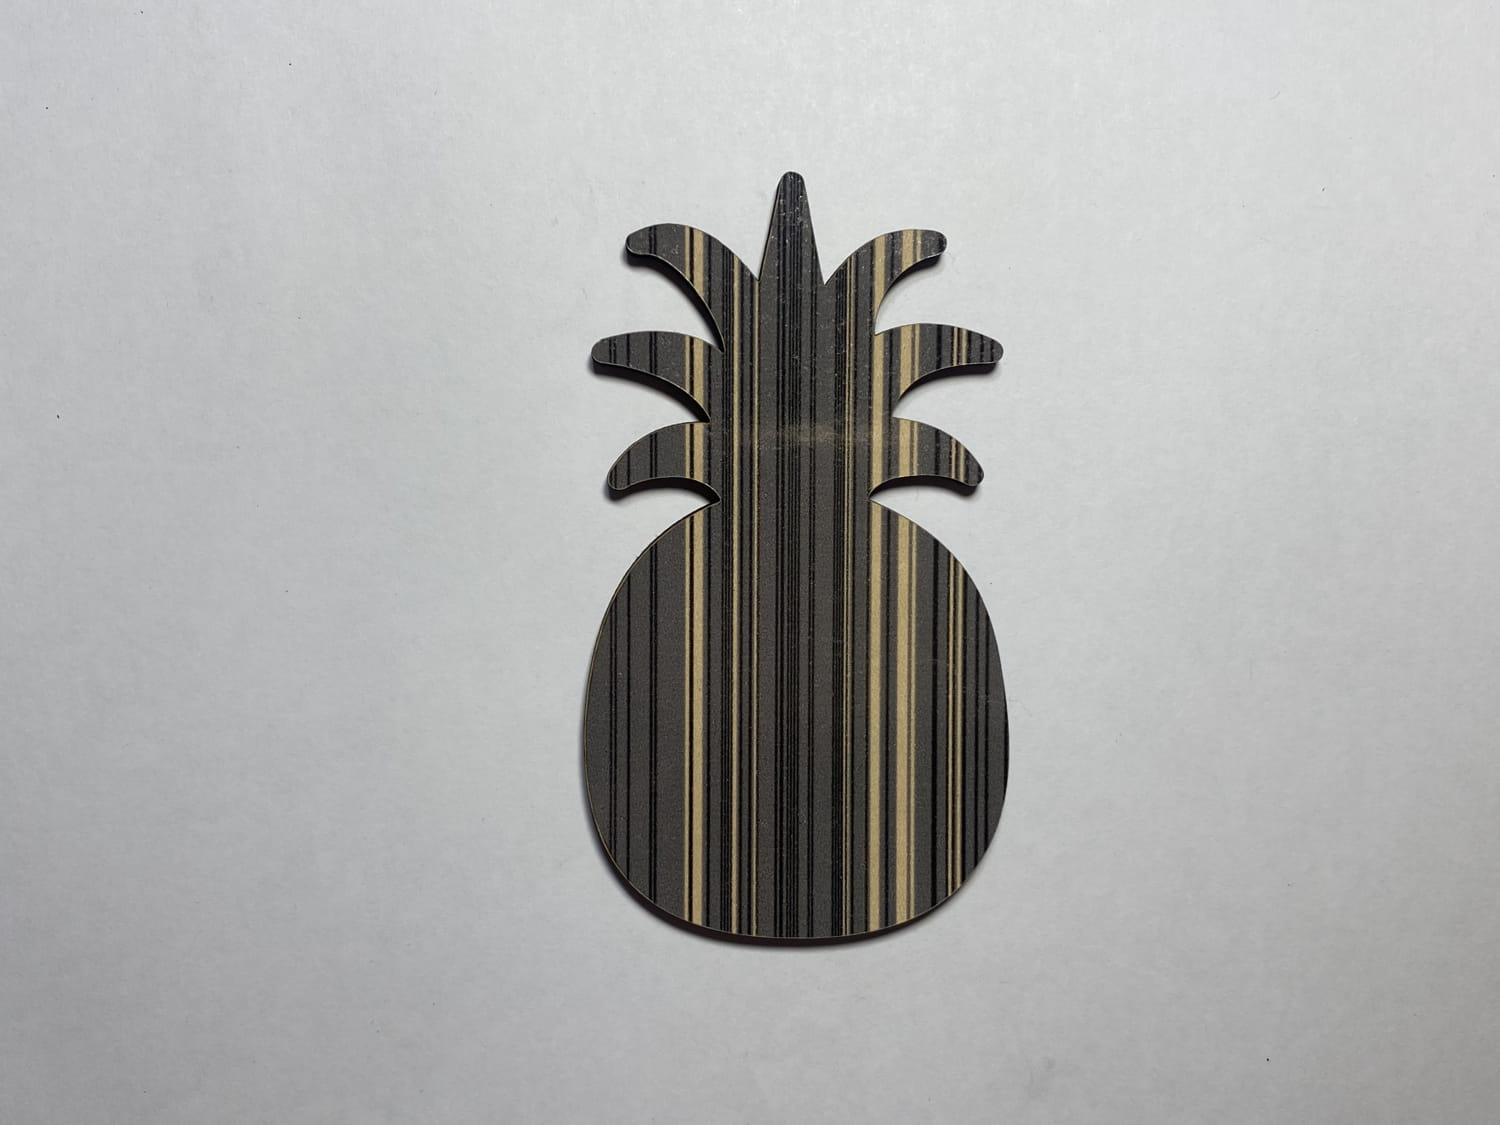 Laser Cut Wood Pineapple Cutout For Crafts Free Vector